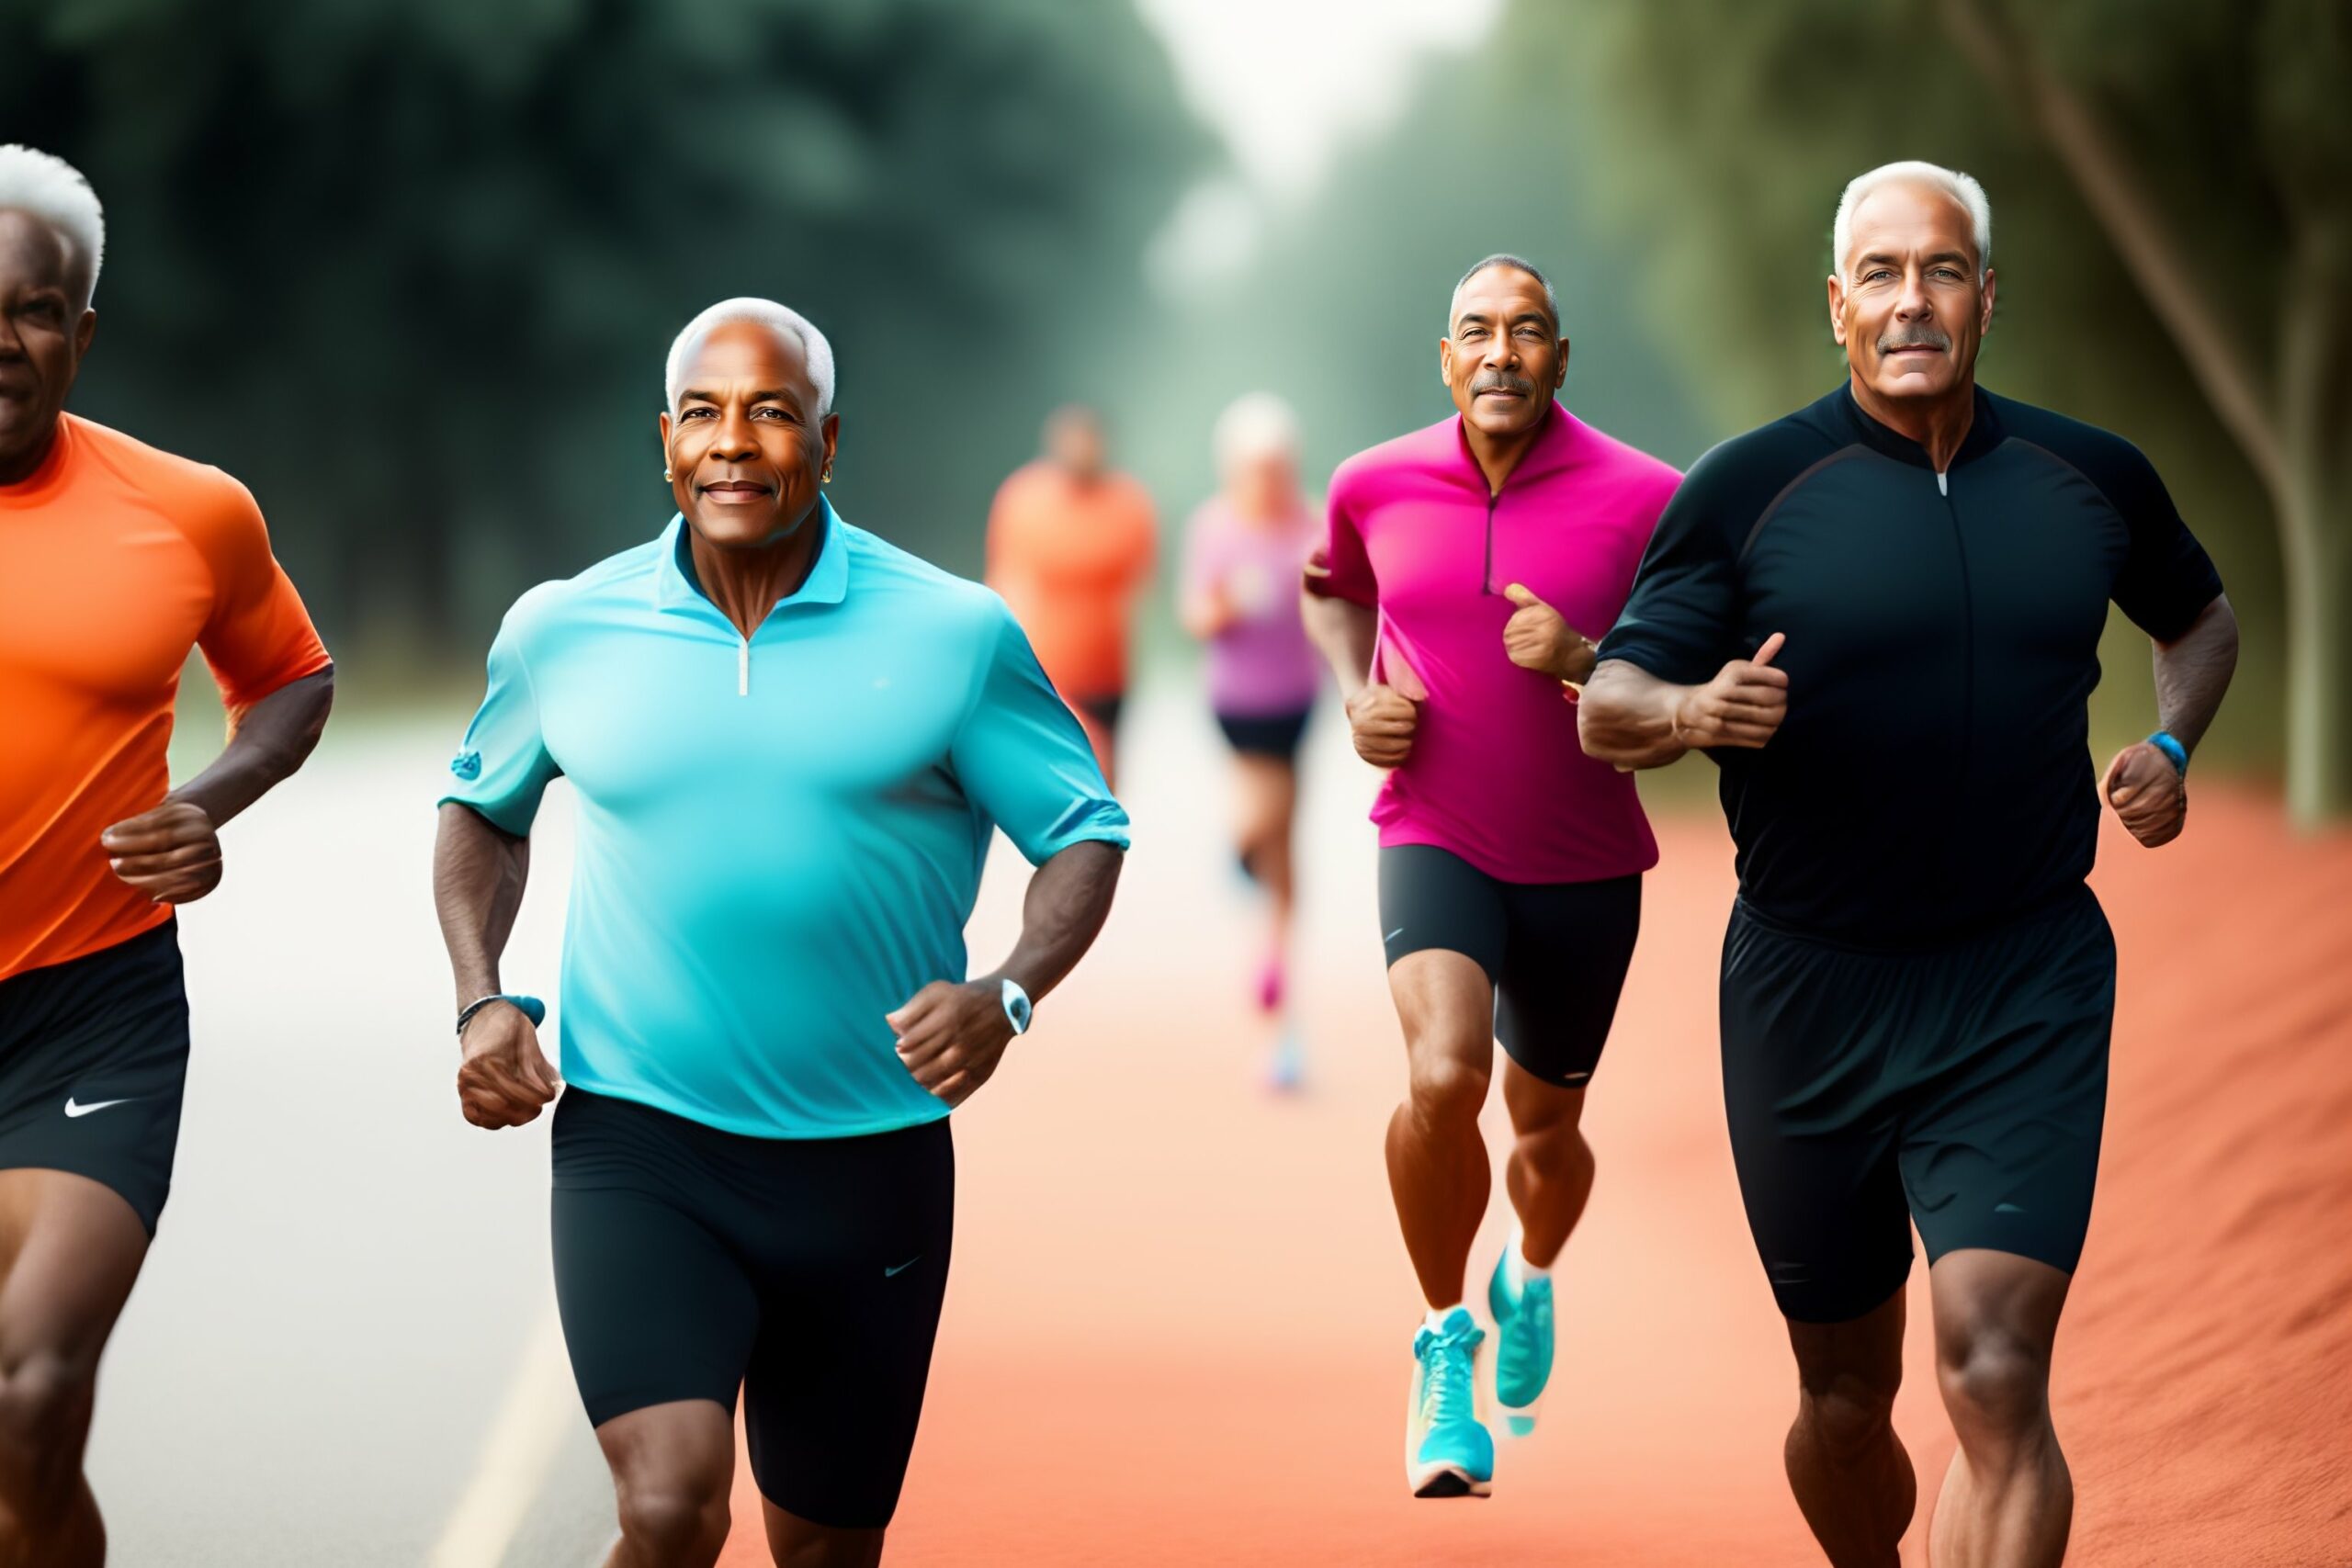 Absolute Wellness The Benefits of Exercise How Regular Physical Activity Can Help You Live Longer